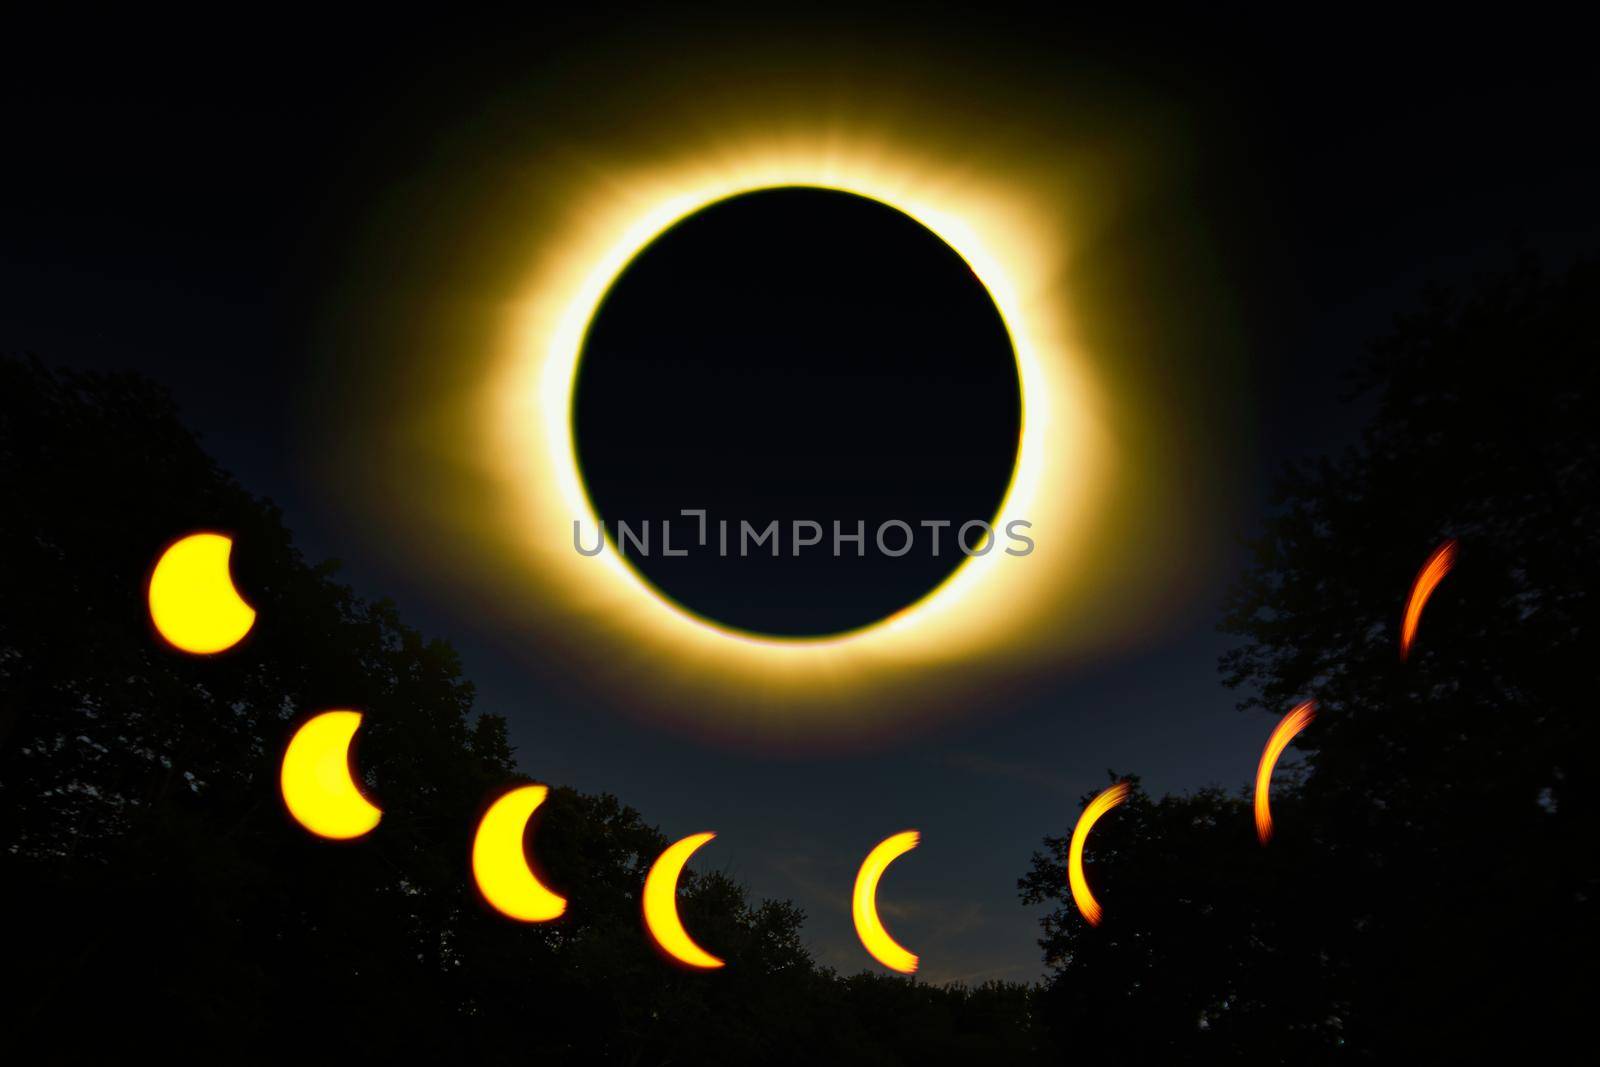 Image of Total eclipse of the sun by the moon and all phases of the solar eclipse in yellow